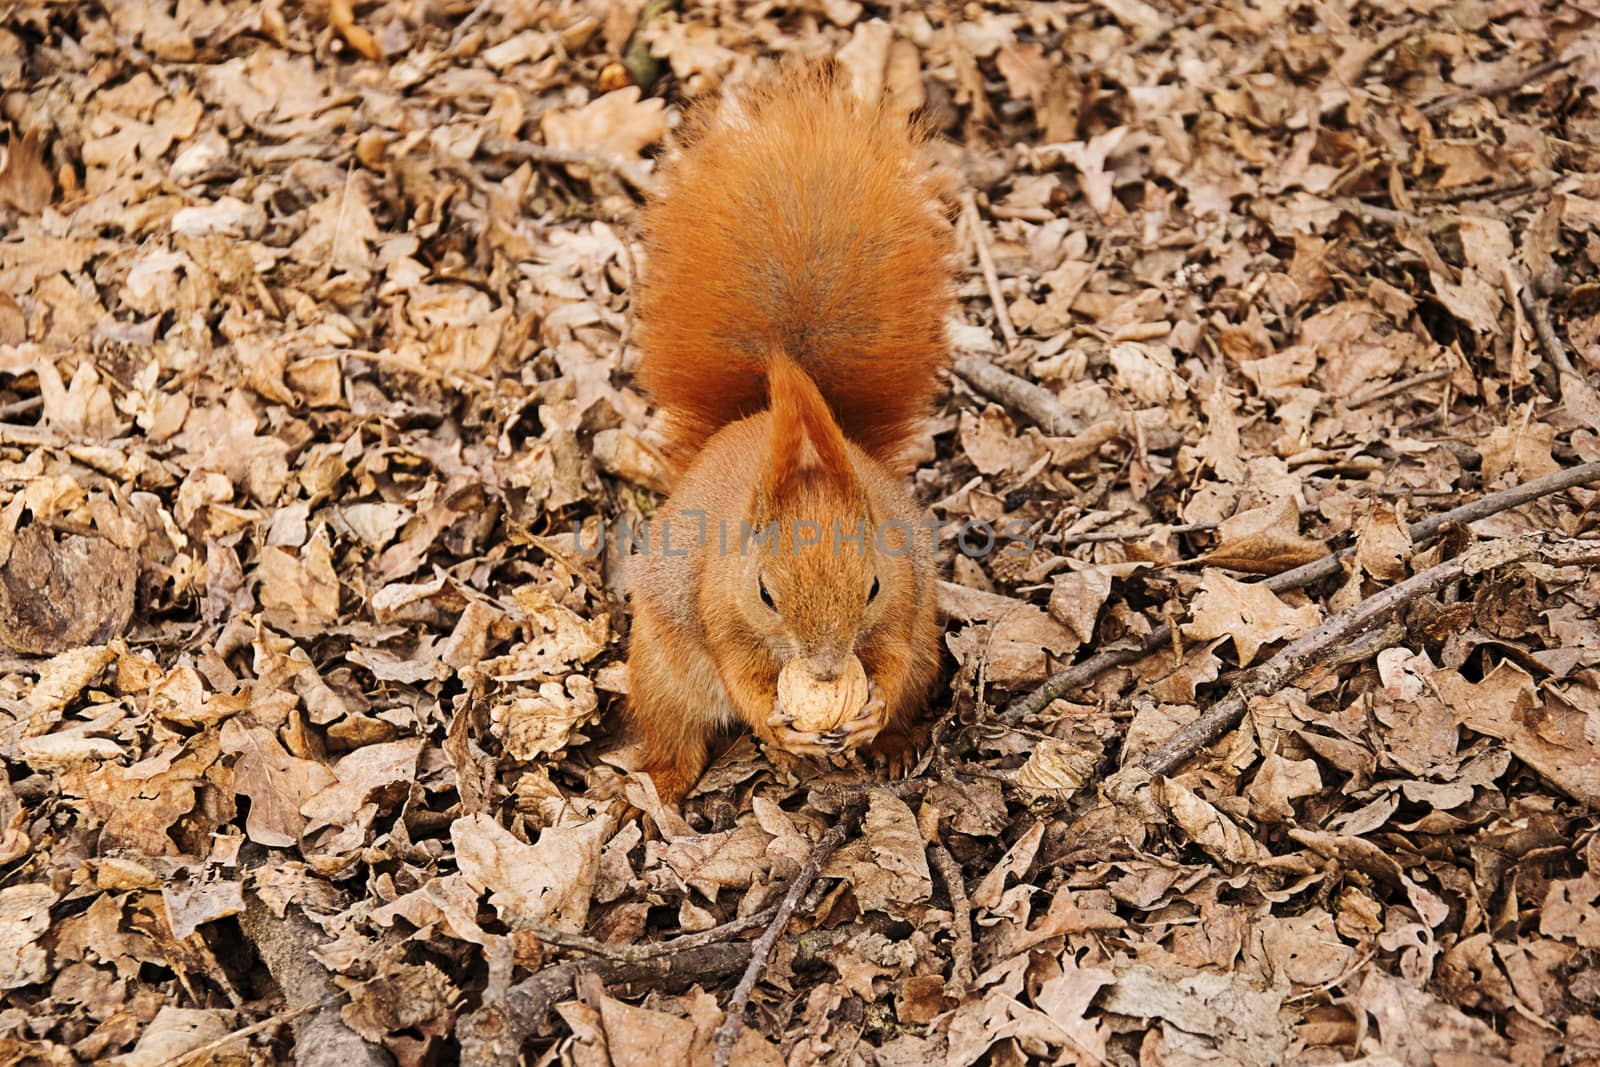 the red squirrel on the ground eats a walnut